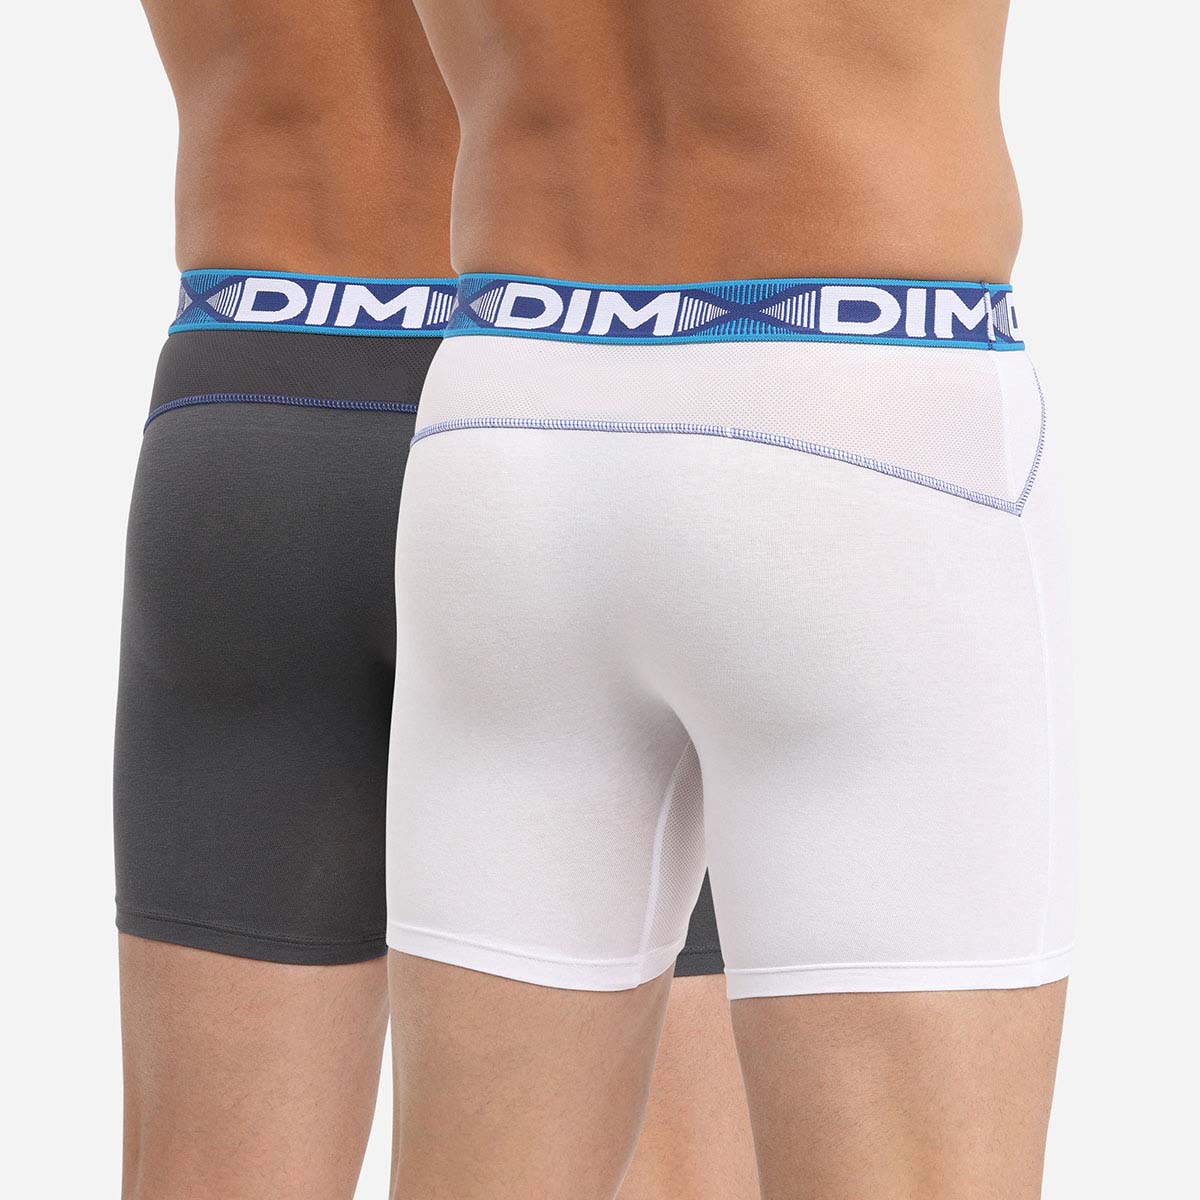 Pack of 2 pairs of 3D Flex Air long trunks in white and lead grey